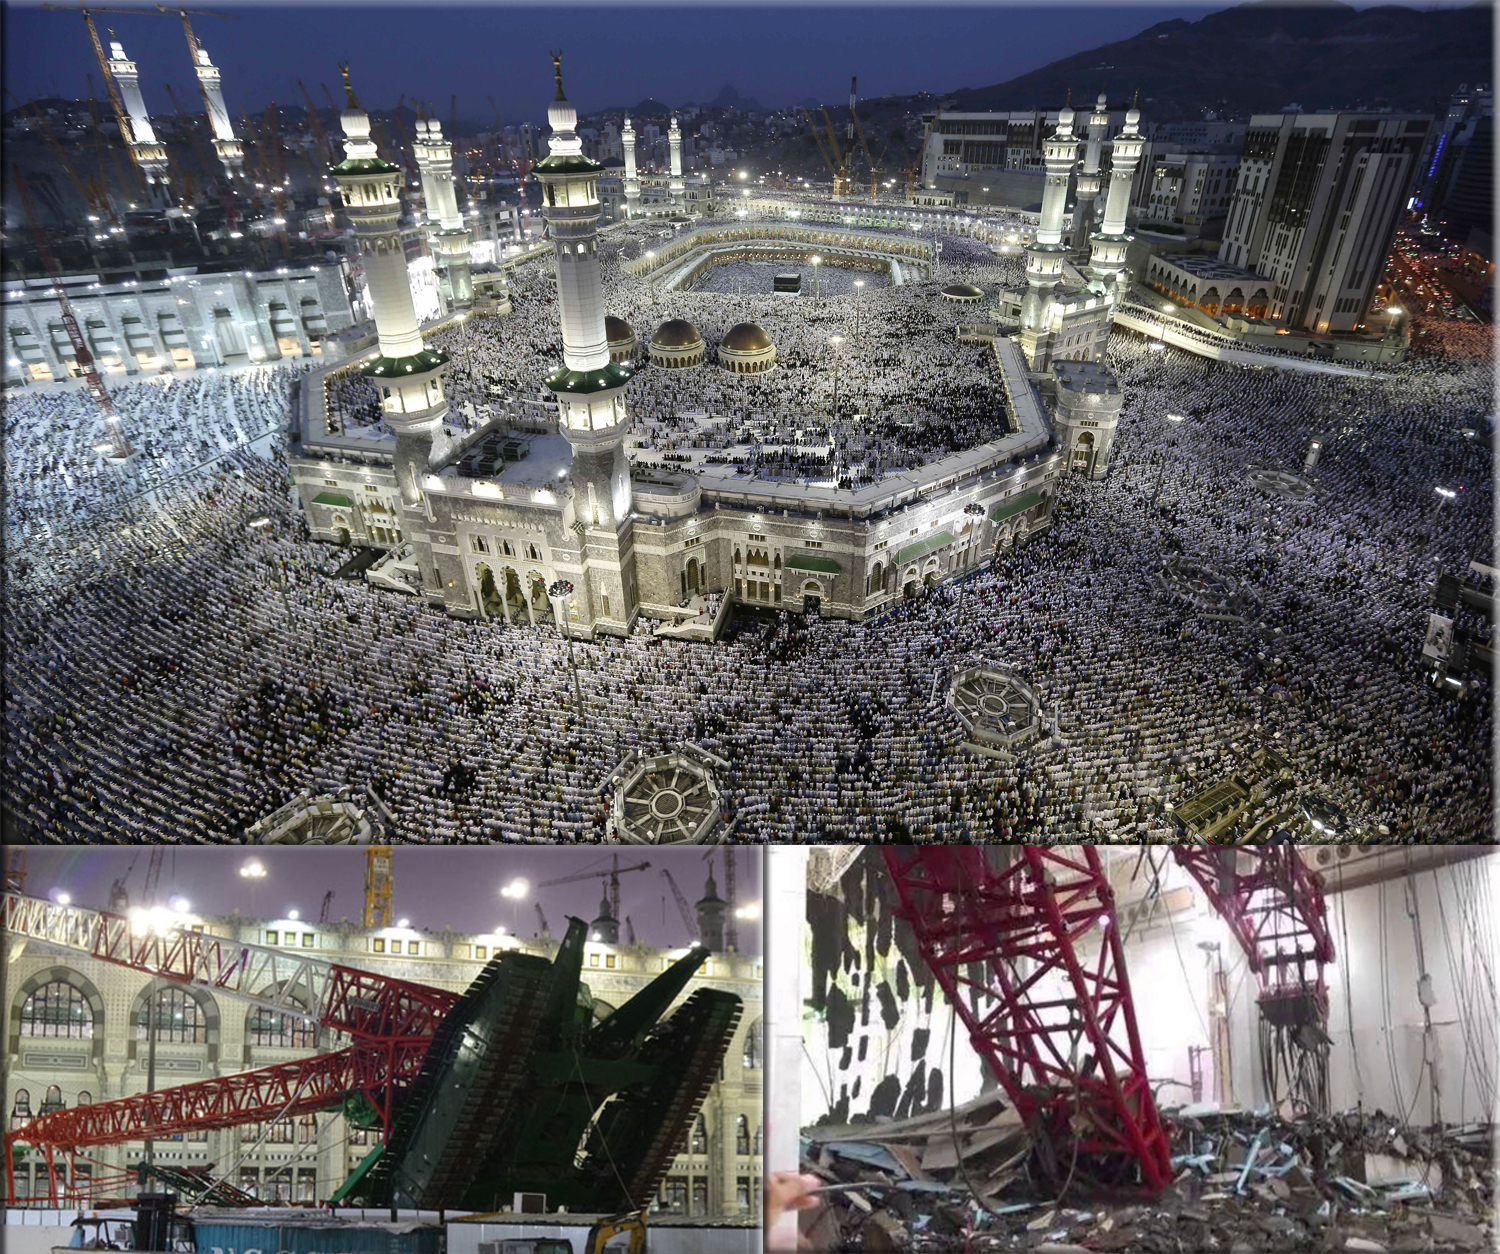 Mecca crane collapse: A crane collapses onto the Masjid al-Haram mosque in Saudi Arabia, killing 111 people and injuring 394 others.